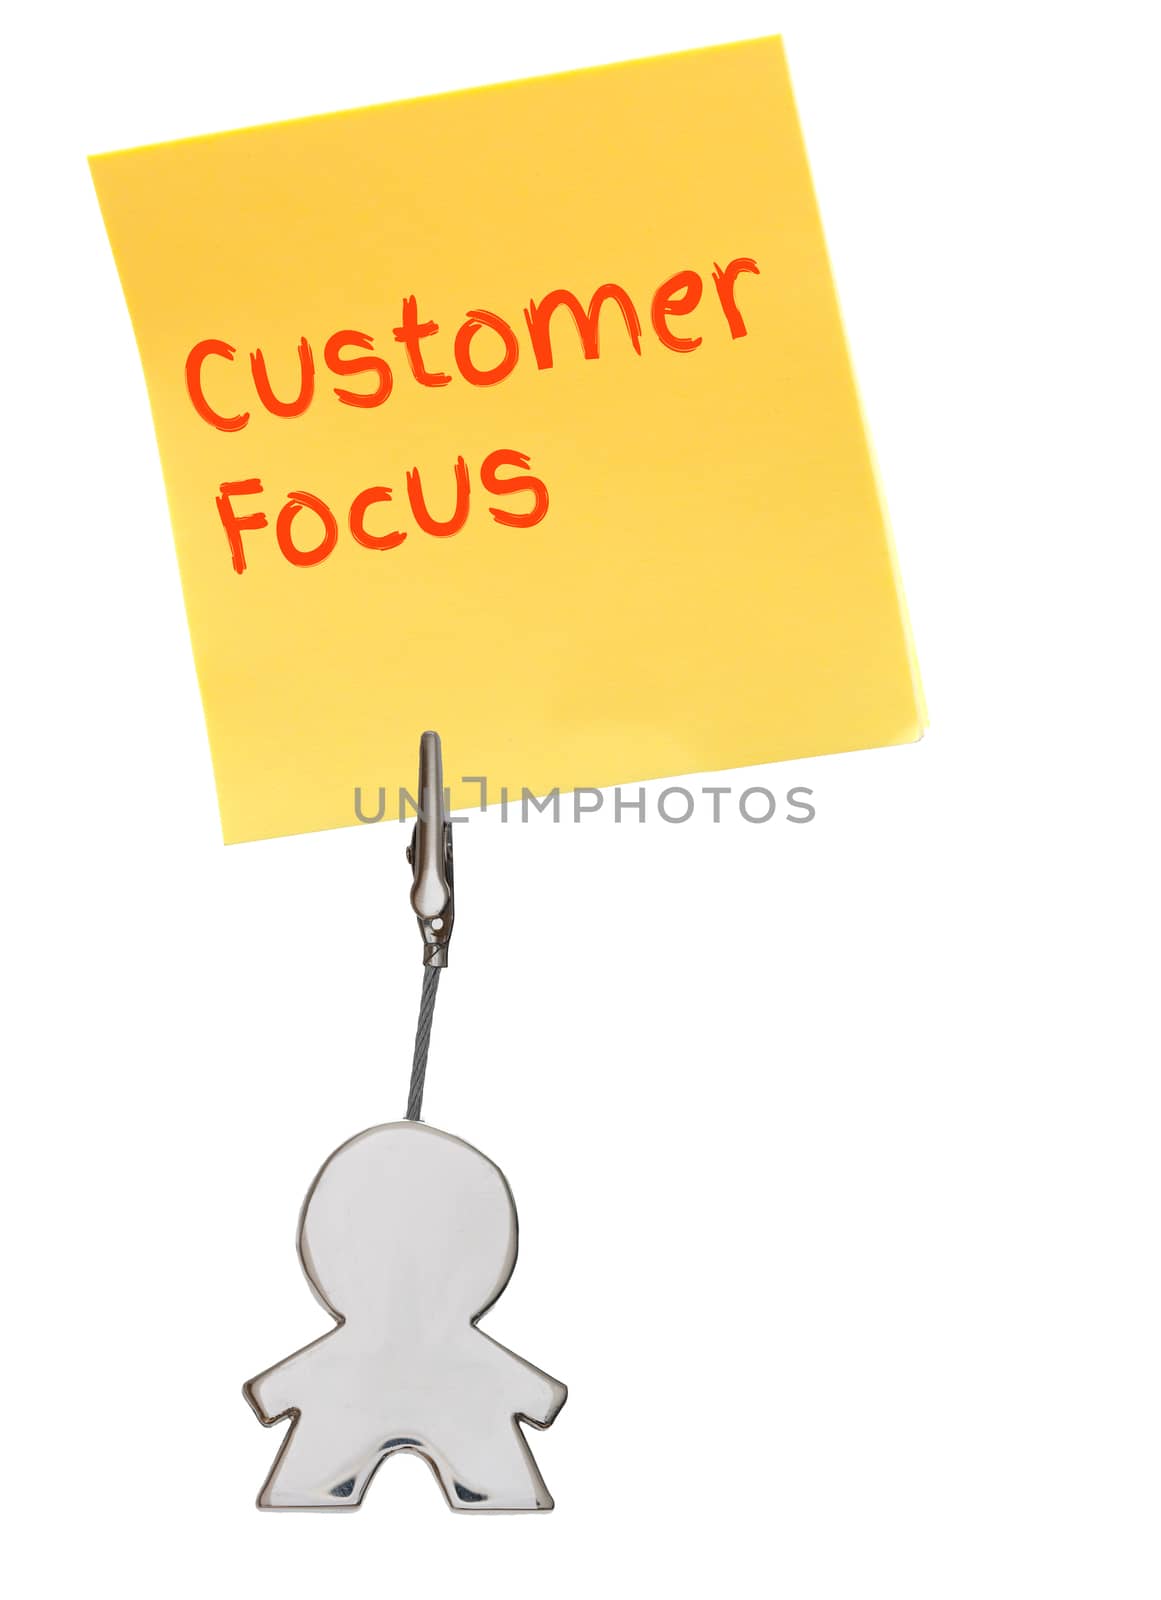 Orange sticker, paper note isolated on white, held by busines card holder figure, business concept, customer focus